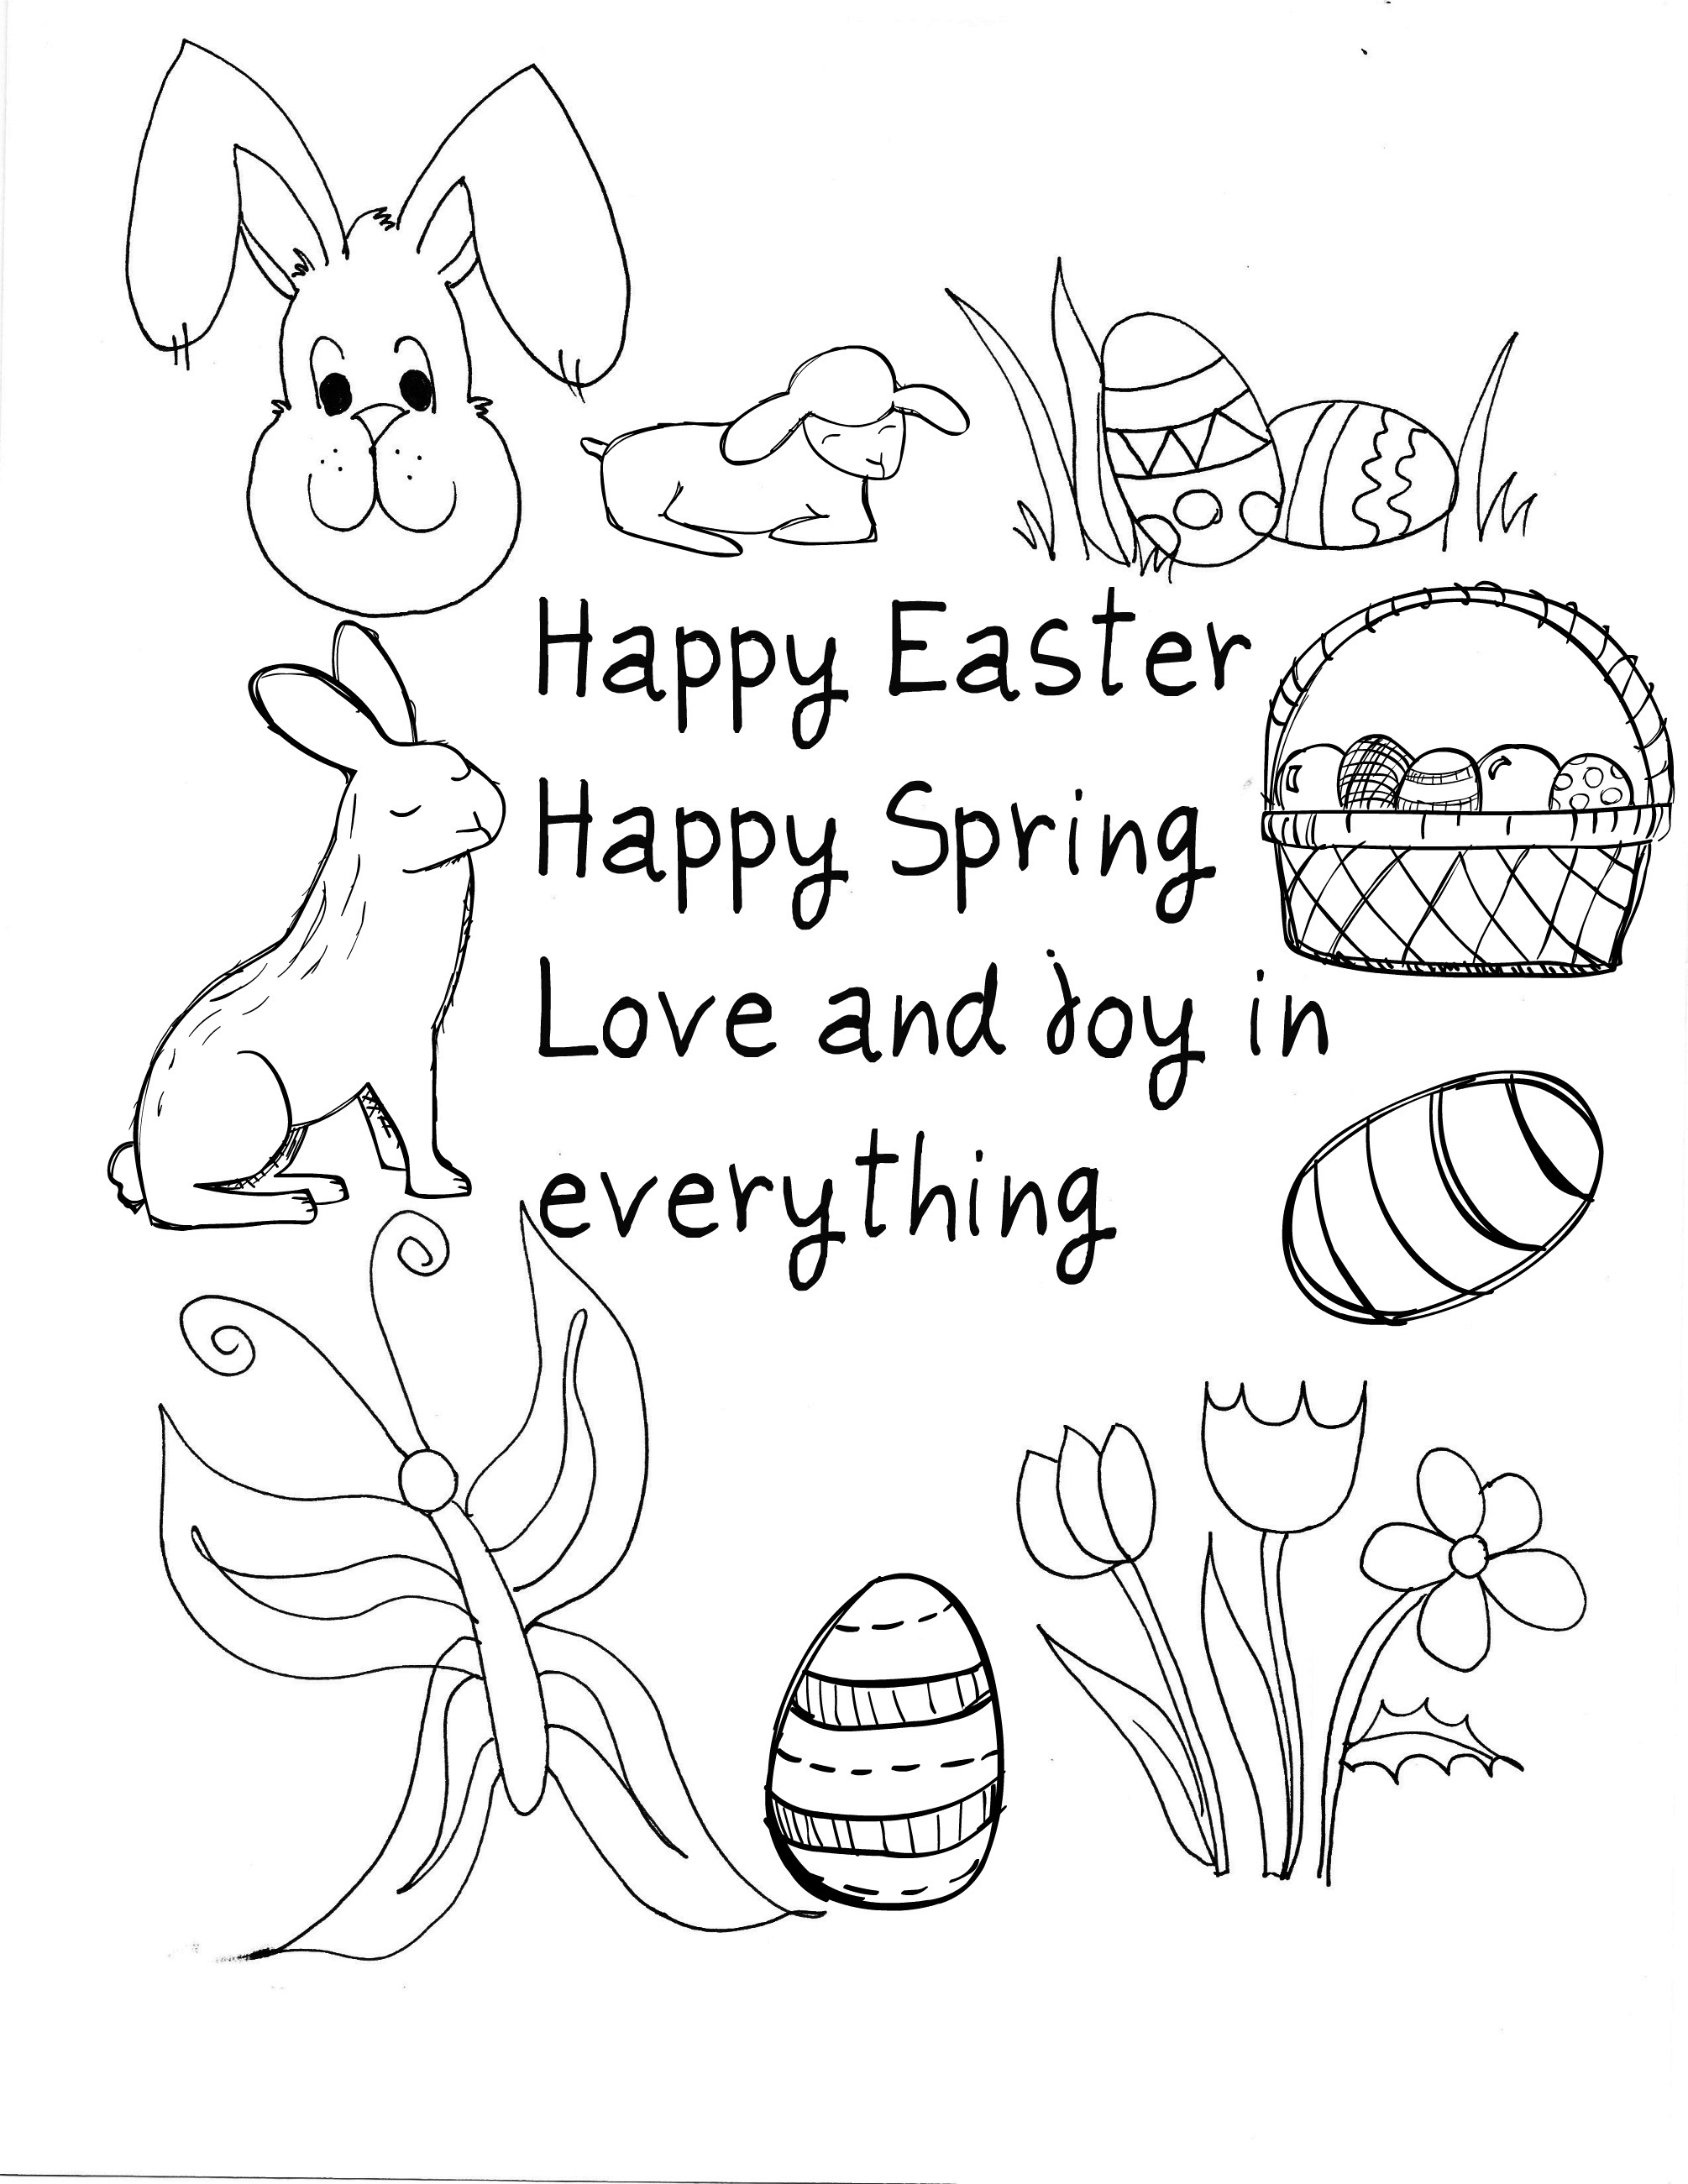 Greetings for kids easter 10 Free,